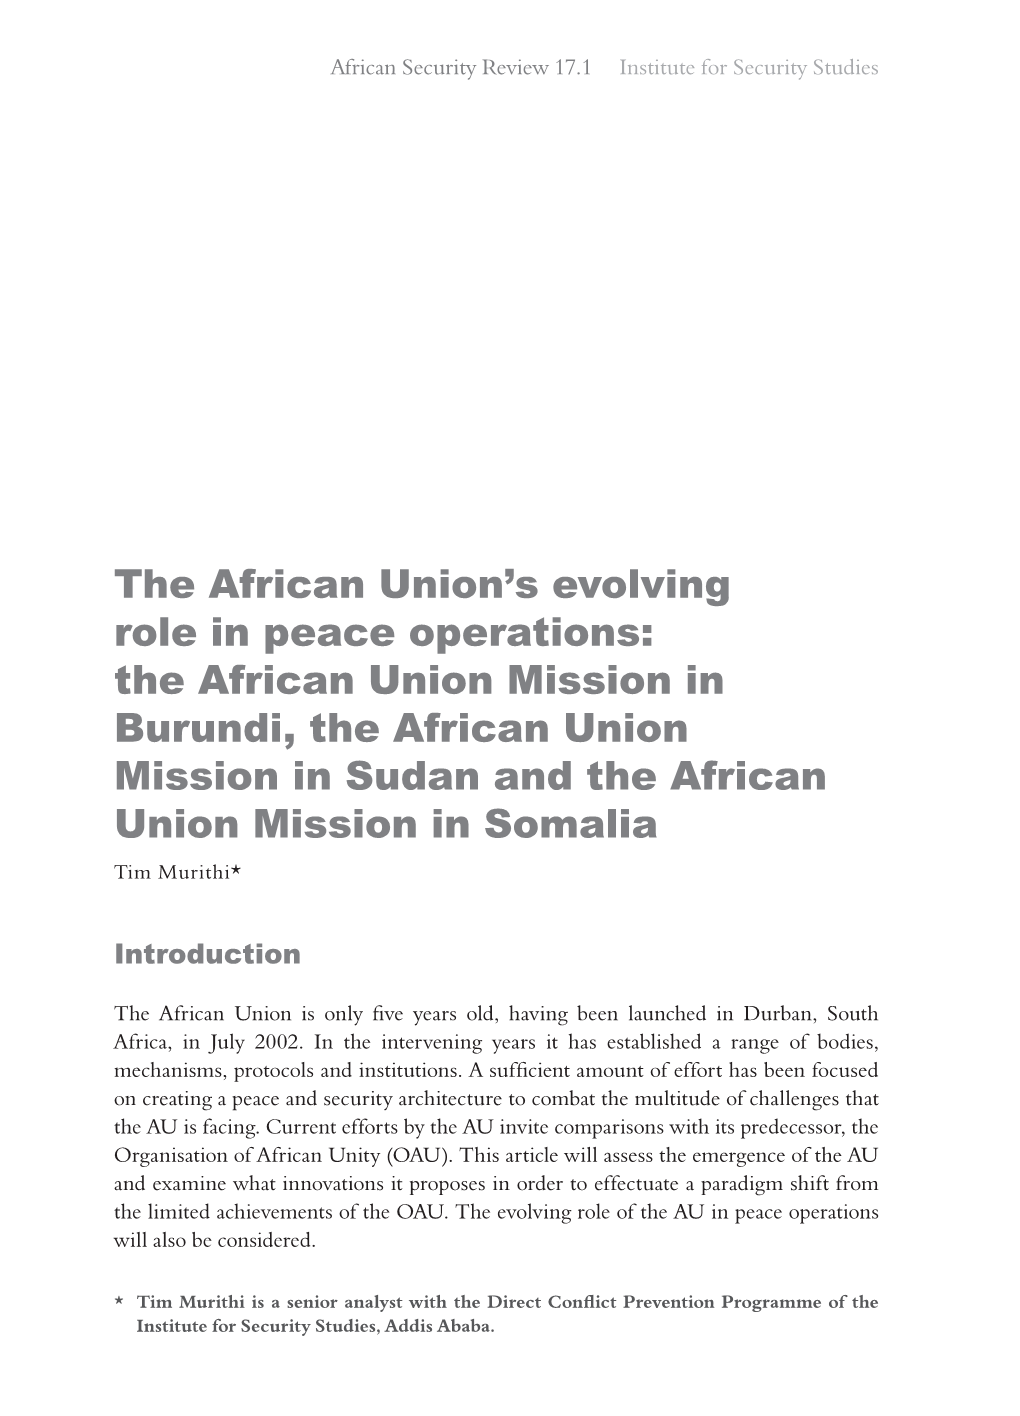 The African Union's Evolving Role in Peace Operations